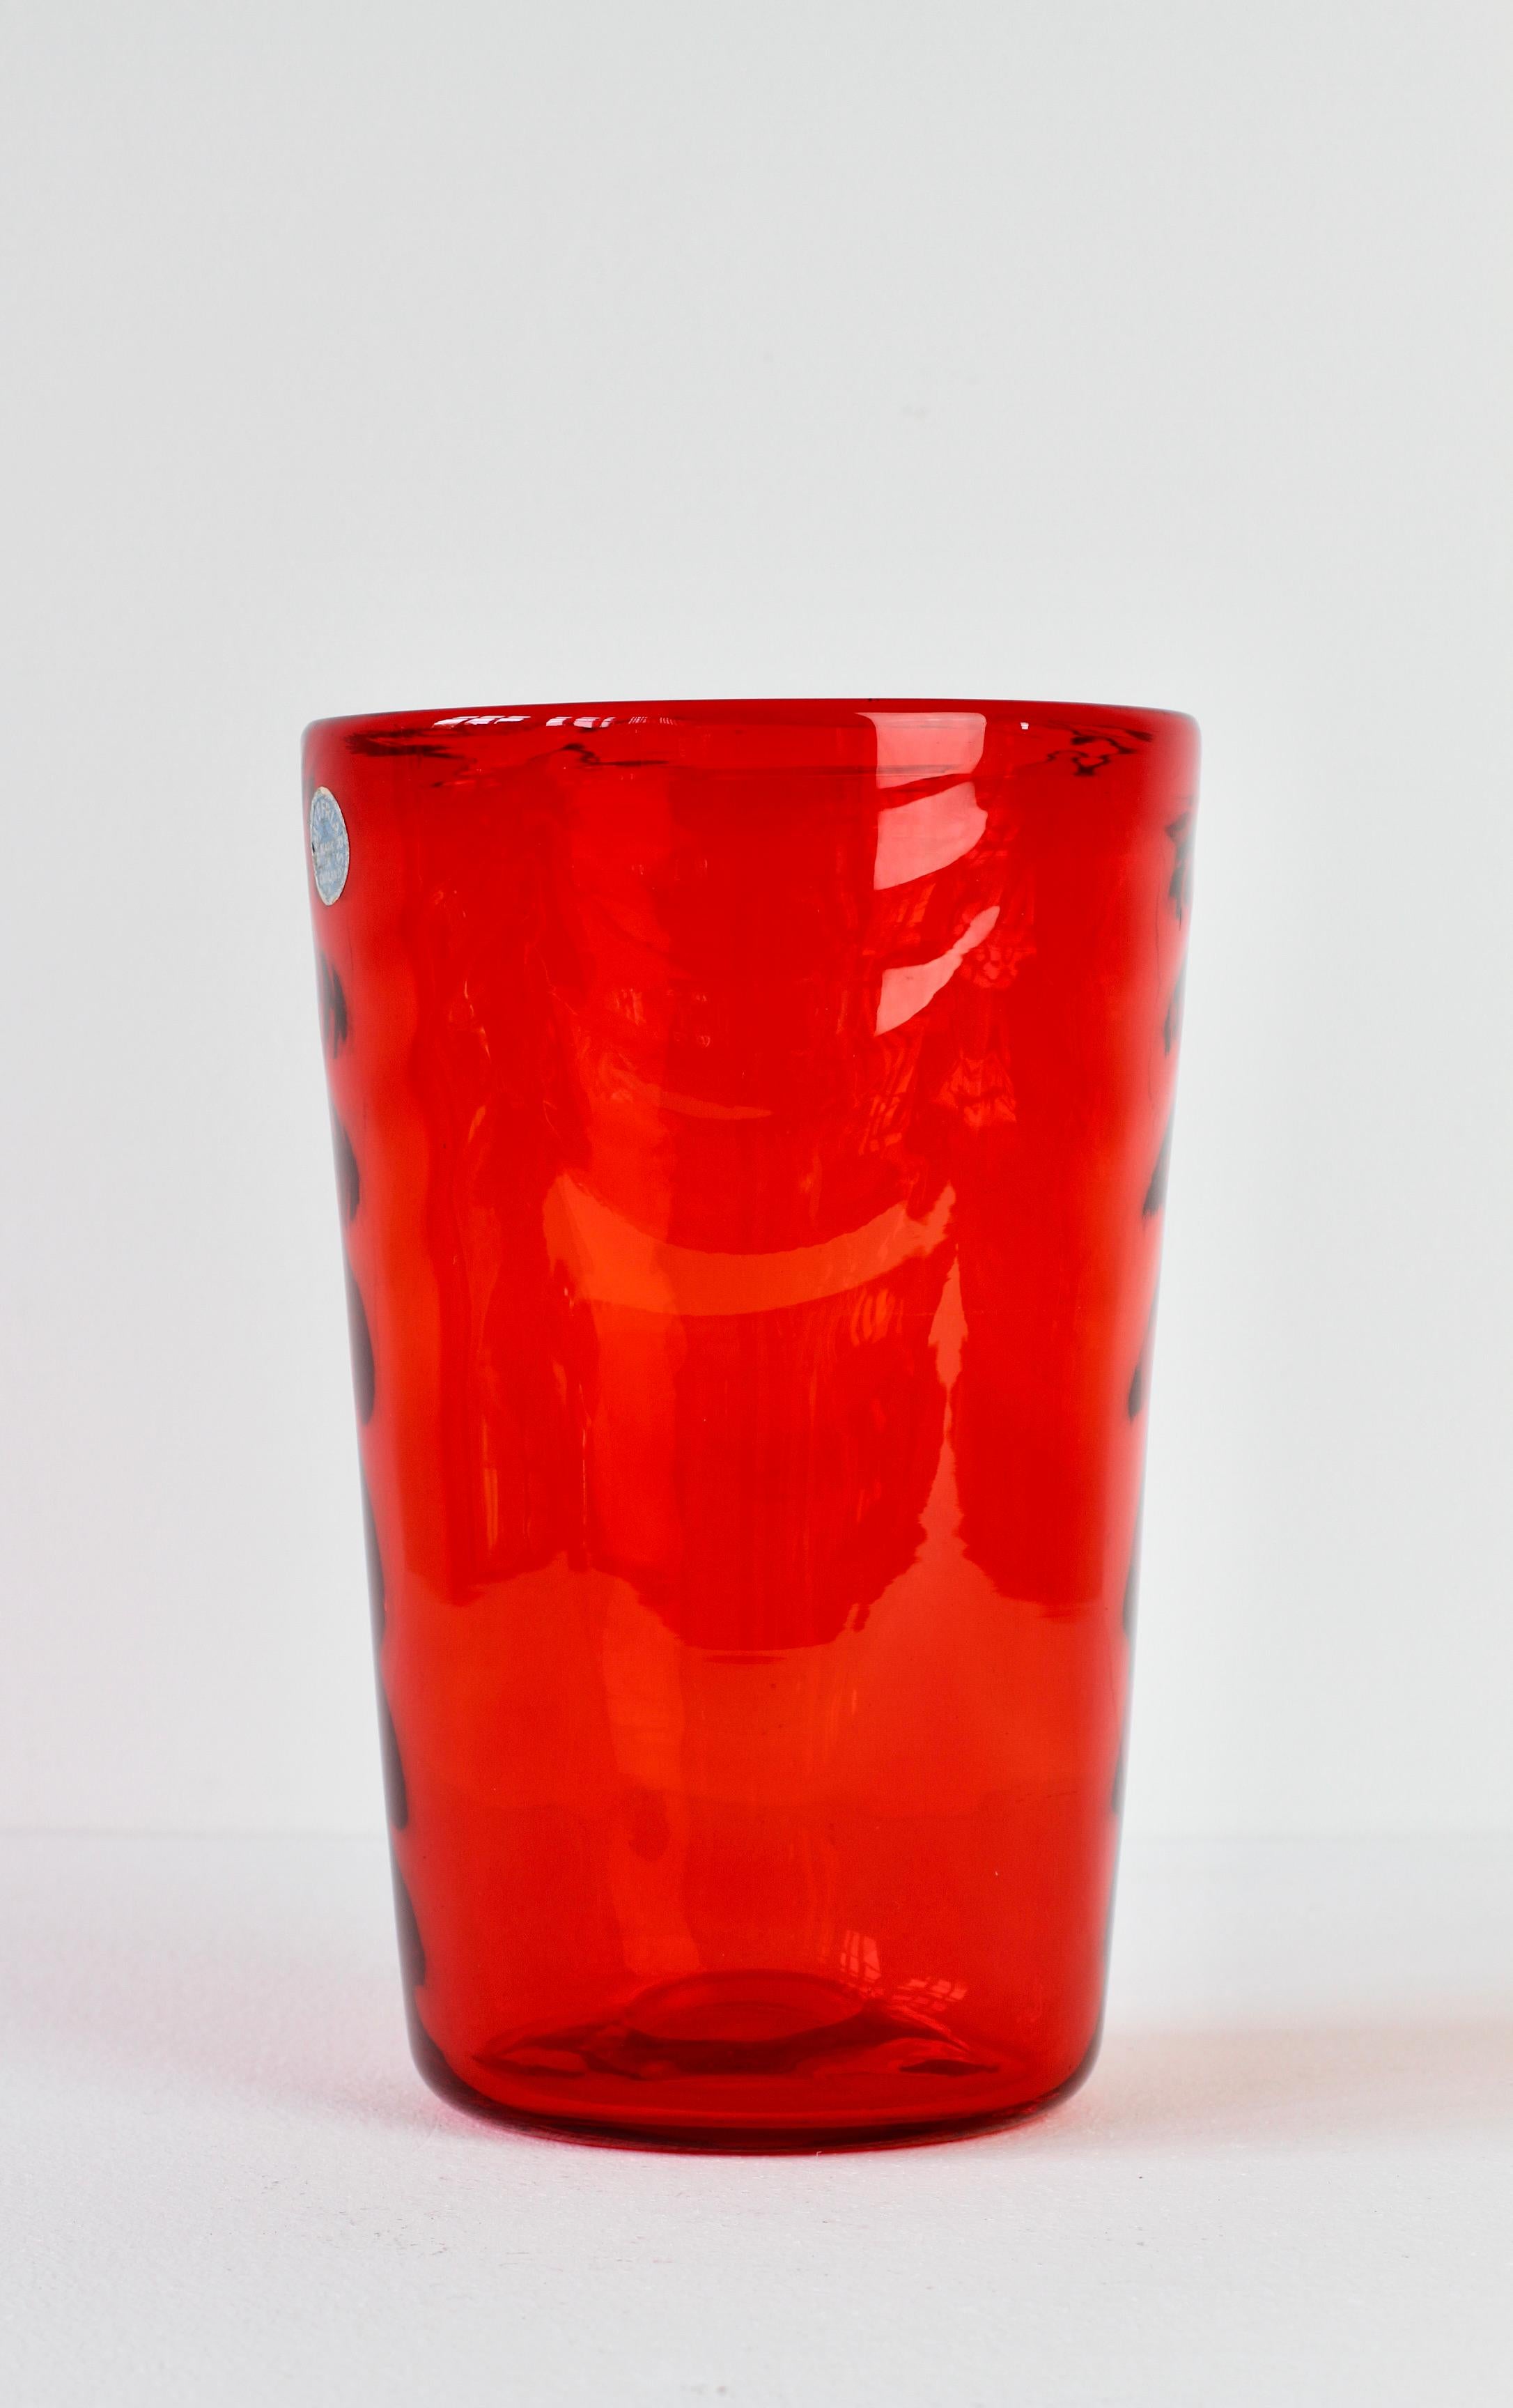 Whitefriars Vintage Vibrant Red Glass Vase by Barnaby Marriott Powel, C. 1940 For Sale 2